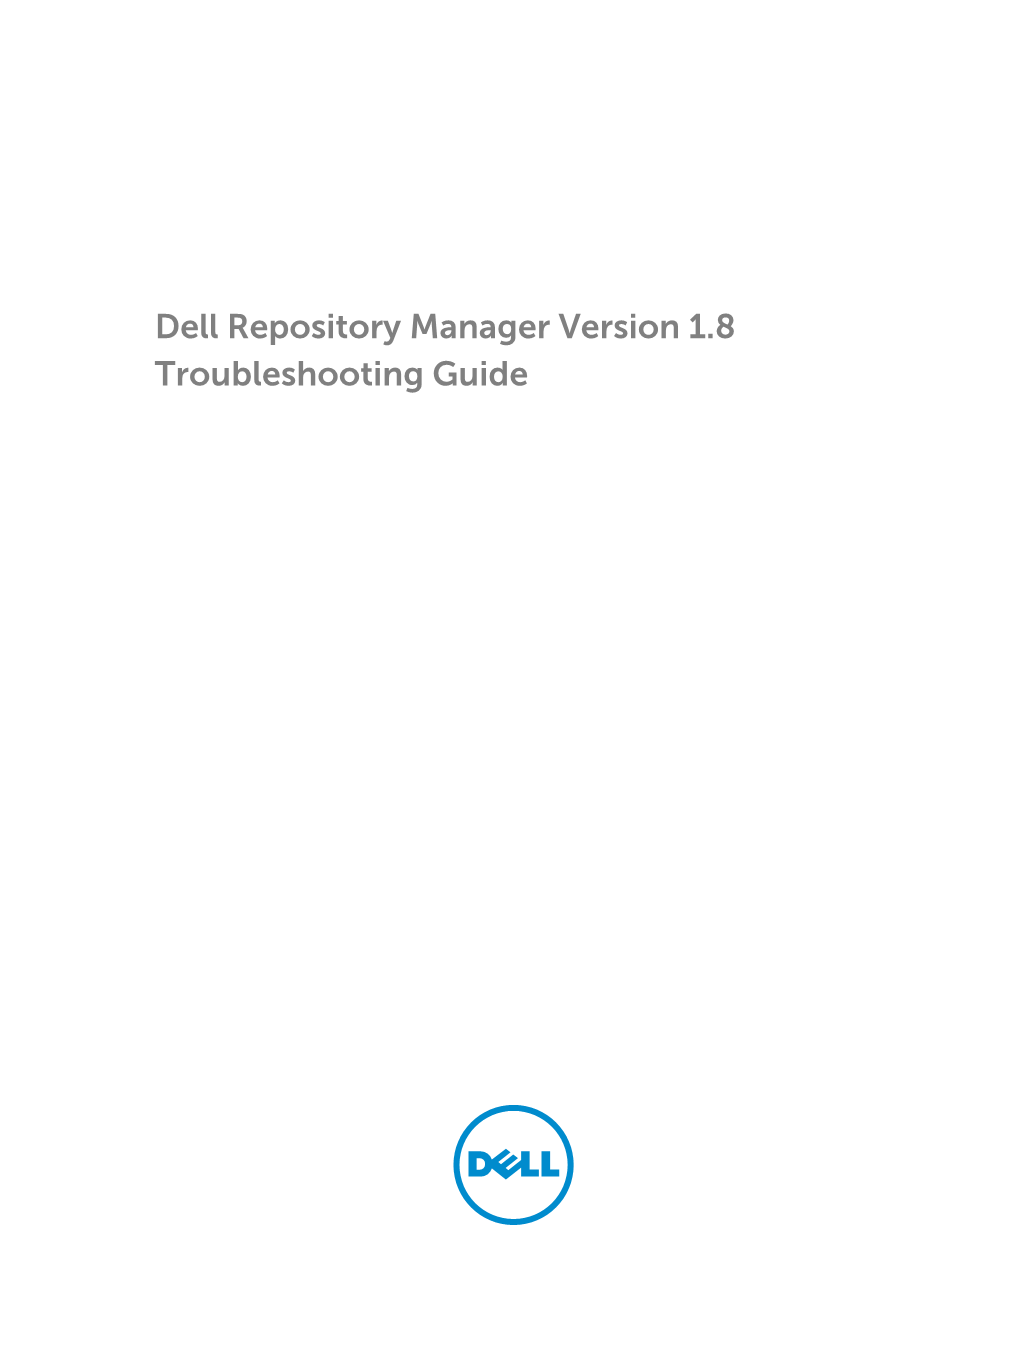 Dell Repository Manager Version 1.8 Troubleshooting Guide Notes, Cautions, and Warnings